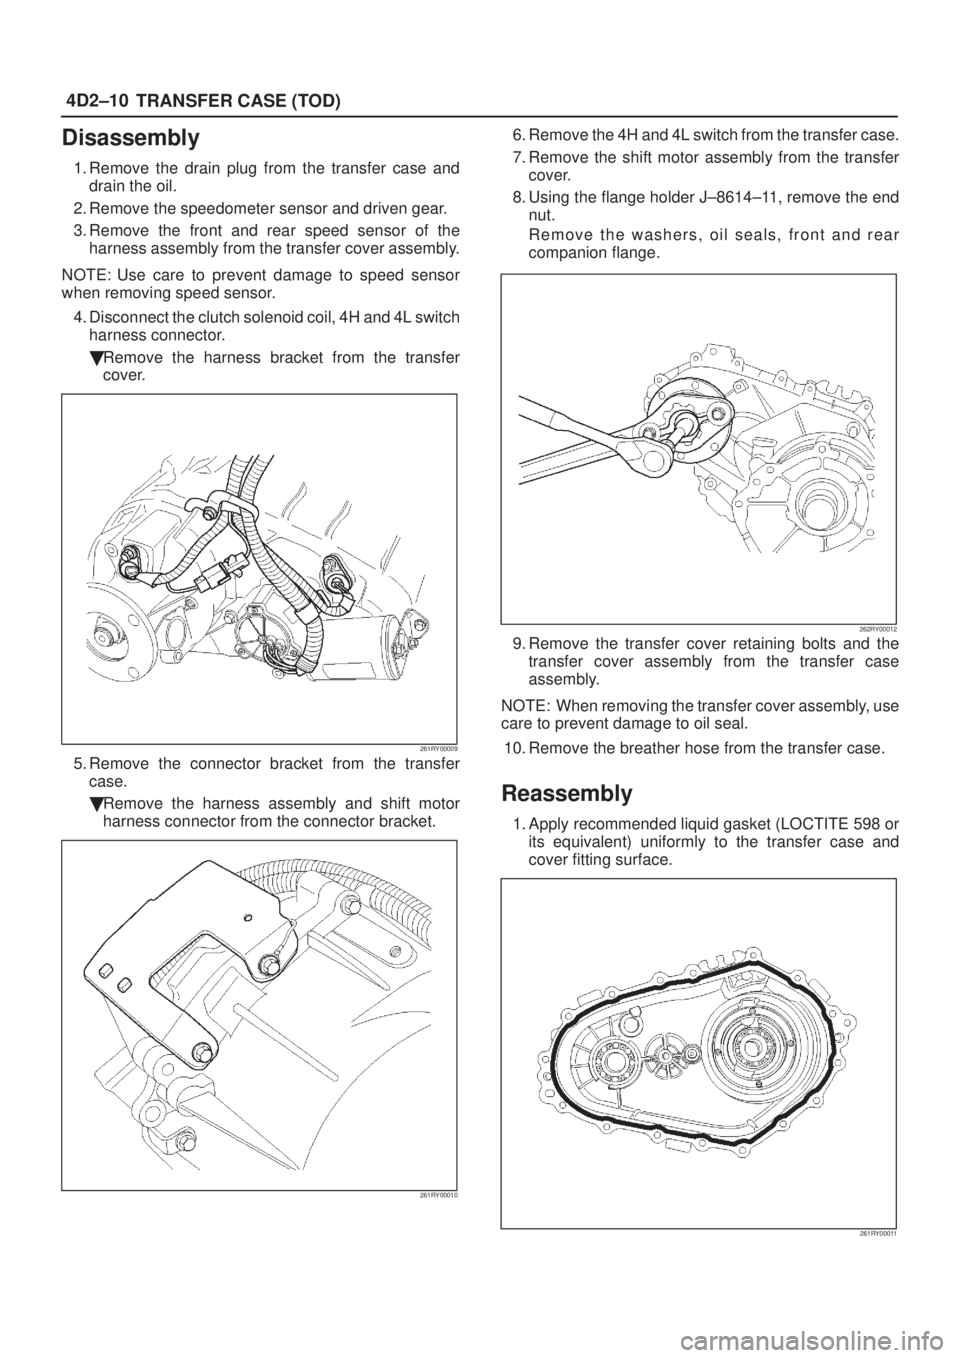 ISUZU AXIOM 2002  Service Repair Manual 4D2±10
TRANSFER CASE (TOD)
Disassembly
1. Remove the drain plug from the transfer case and
drain the oil.
2. Remove the speedometer sensor and driven gear.
3. Remove the front and rear speed sensor o